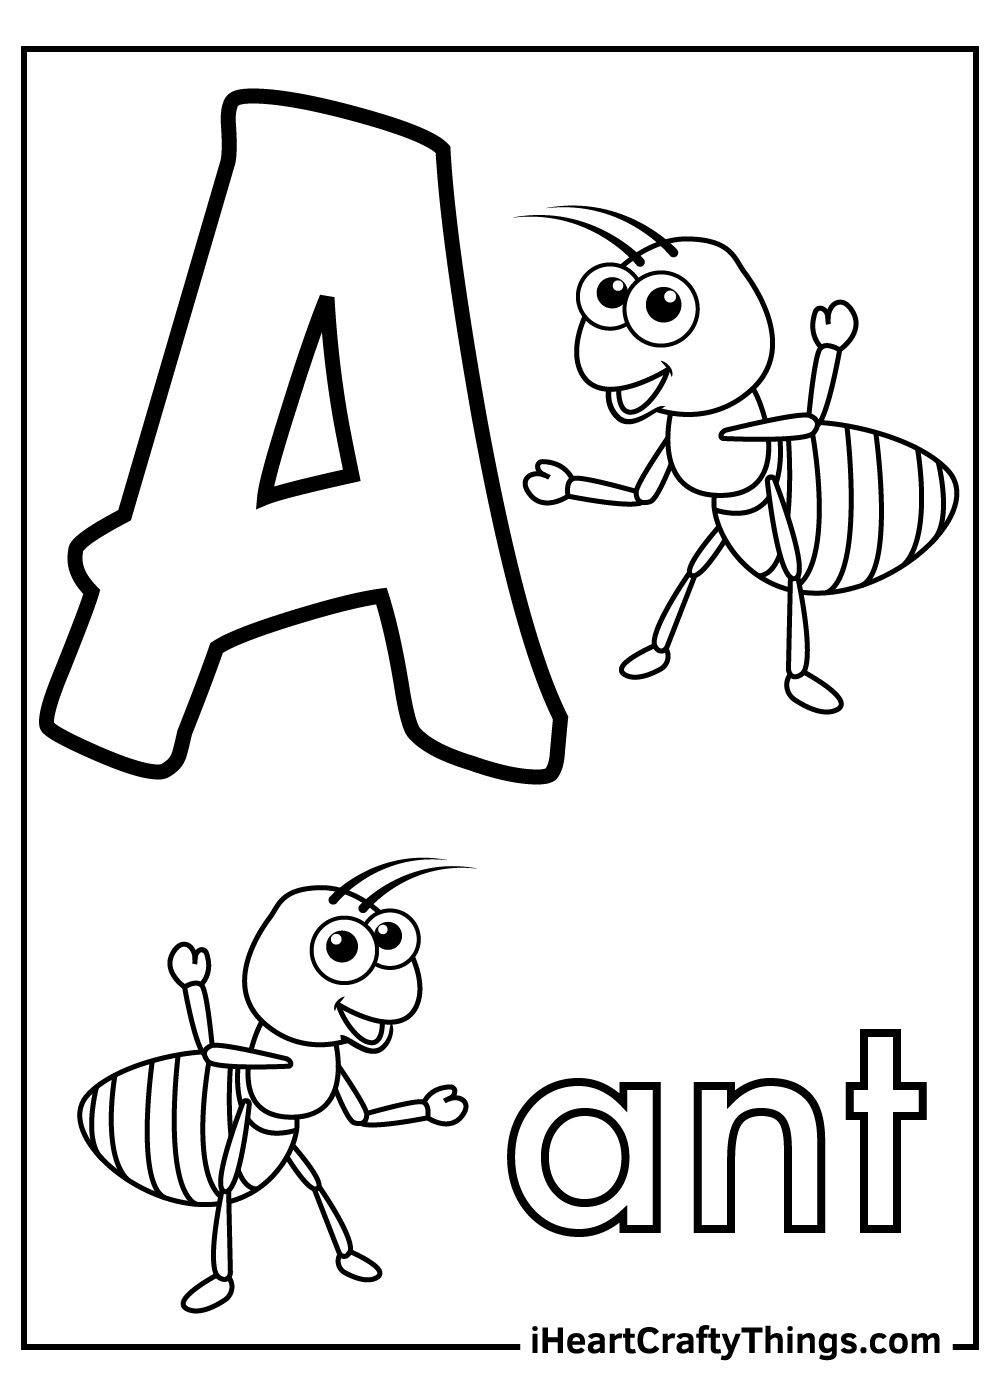 Letter A Coloring Pages Updated 20